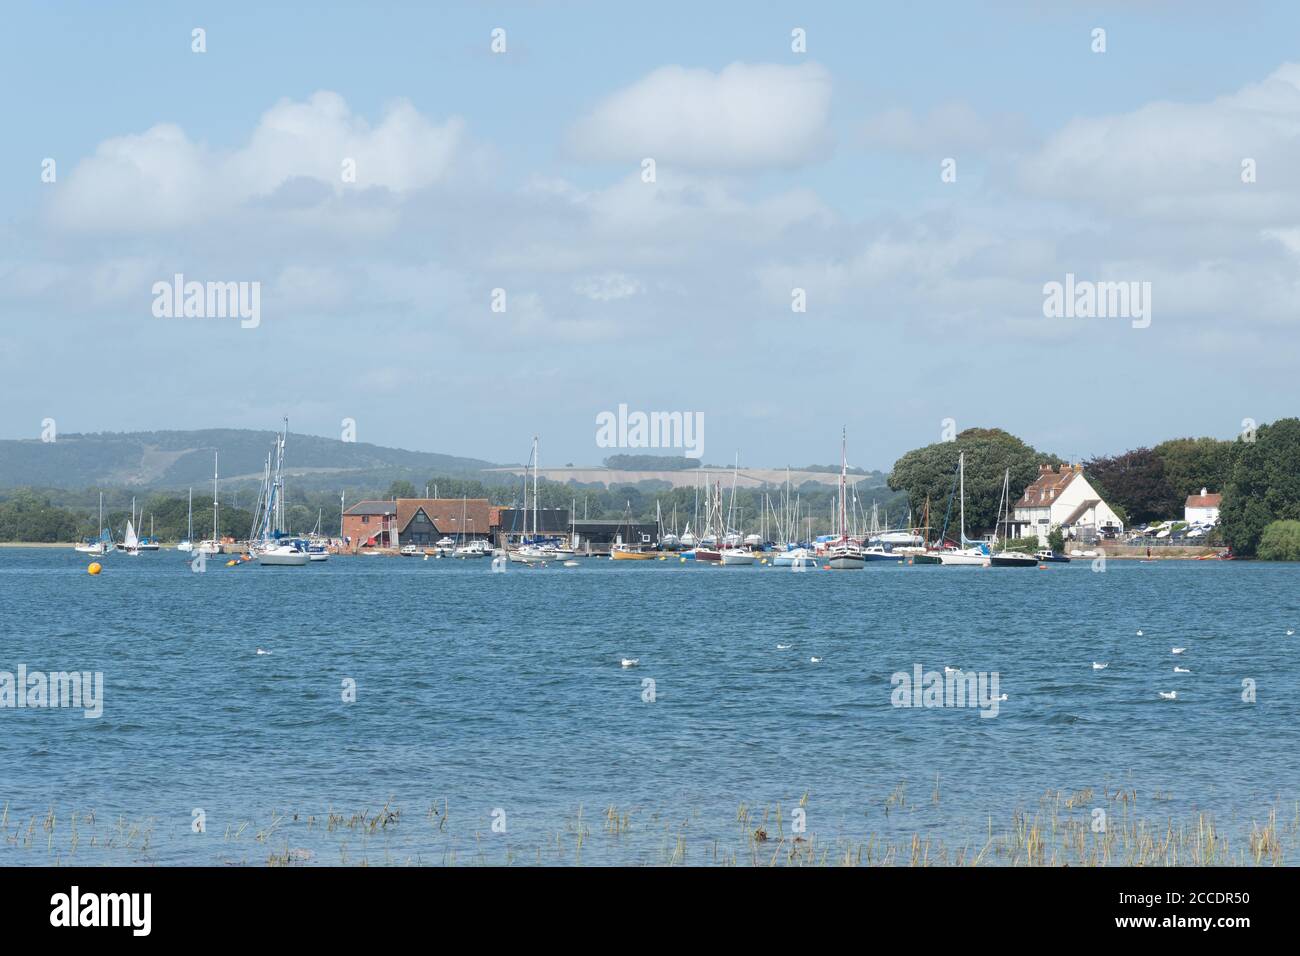 View of the hamlet of Dell Quay across the sea, Chichester Harbour, West Sussex, UK Stock Photo